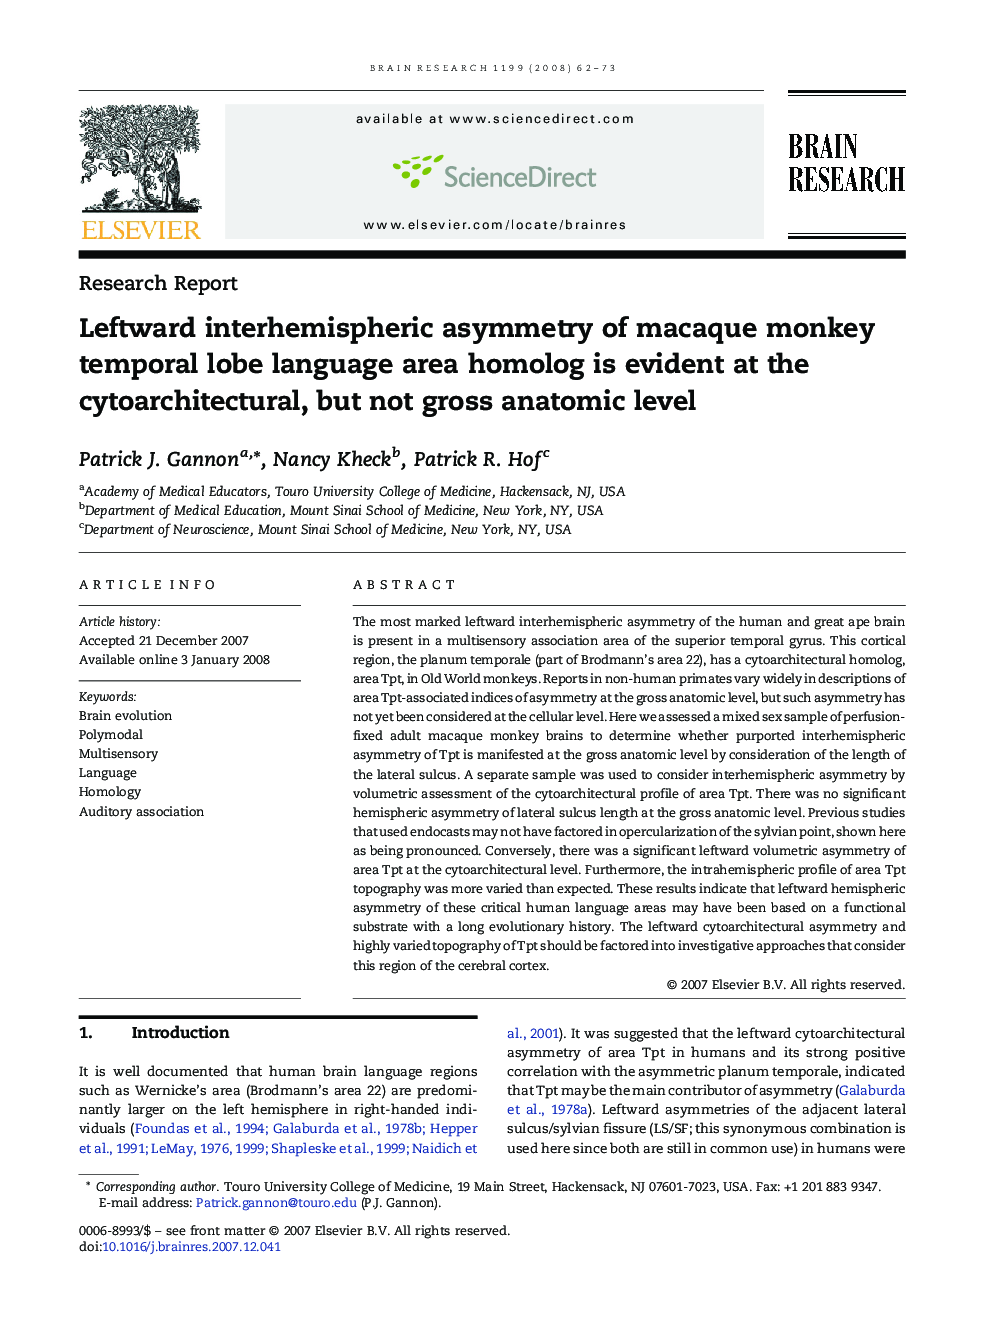 Leftward interhemispheric asymmetry of macaque monkey temporal lobe language area homolog is evident at the cytoarchitectural, but not gross anatomic level